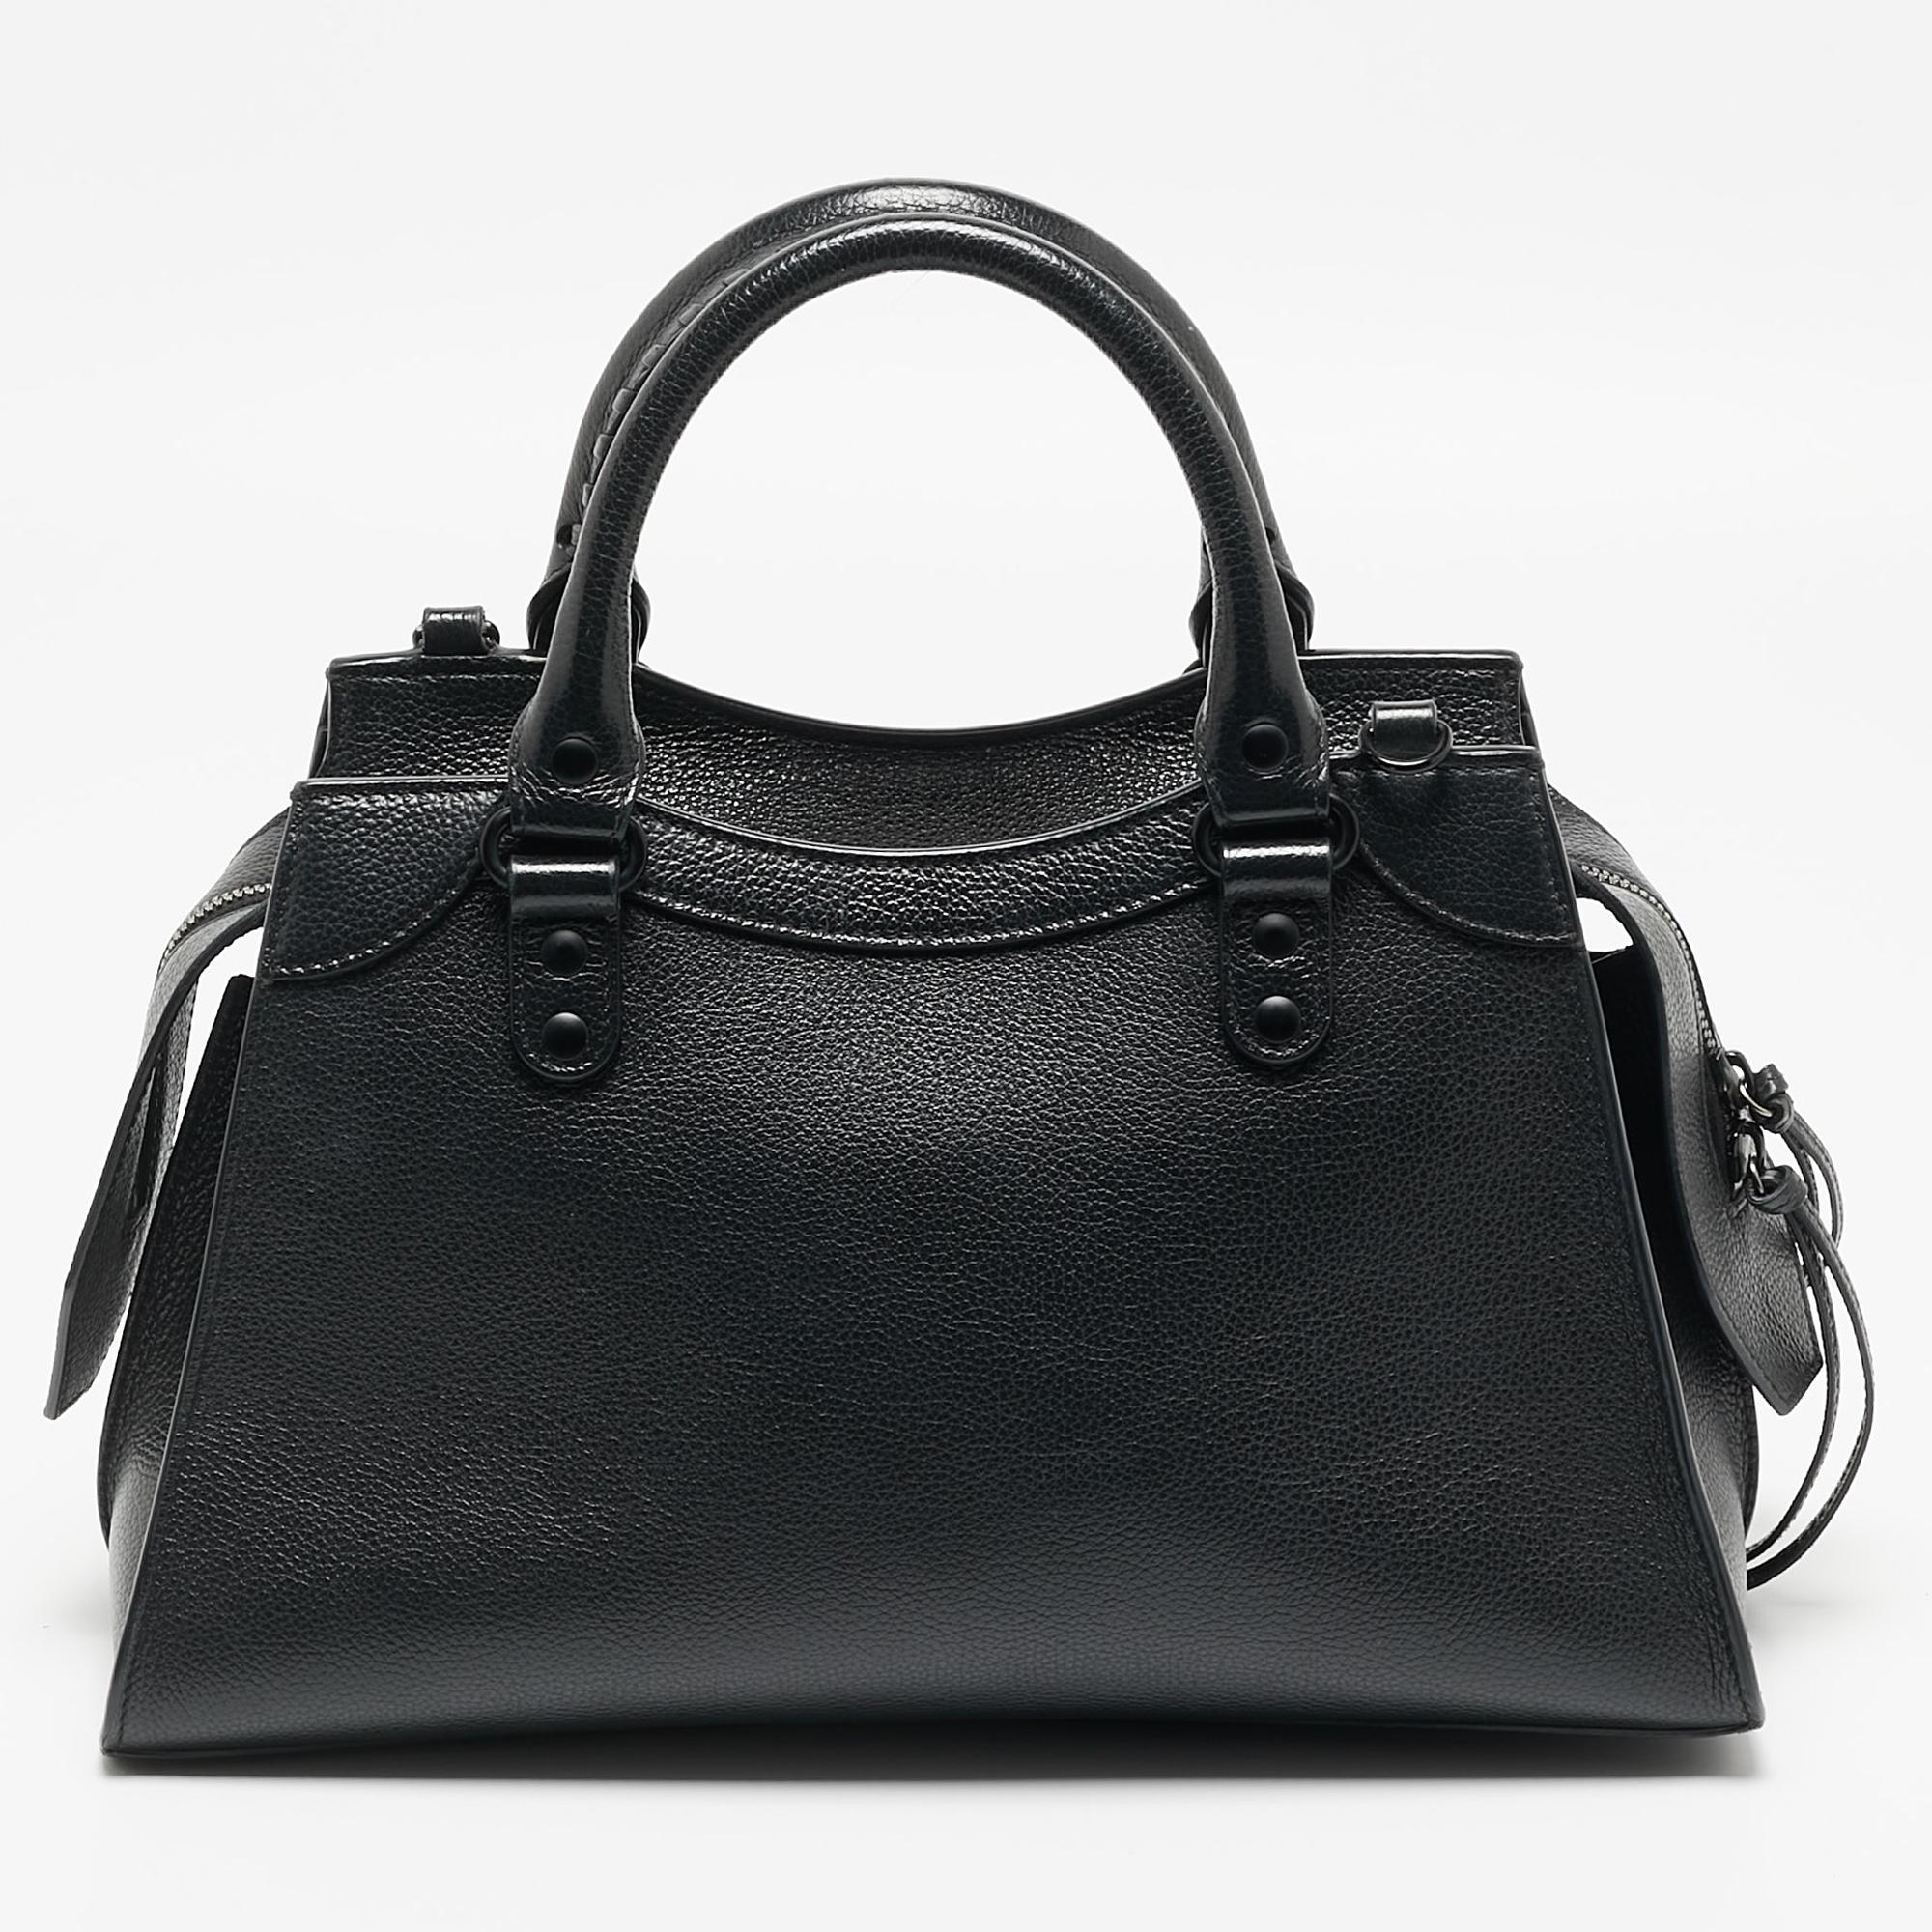 One of the most exemplary and memorable creations of the House is this spectacular Neo Classic tote from Balenciaga. It has been designed using black leather and showcases dual top handles, black-toned hardware, and a shoulder strap. It accommodates